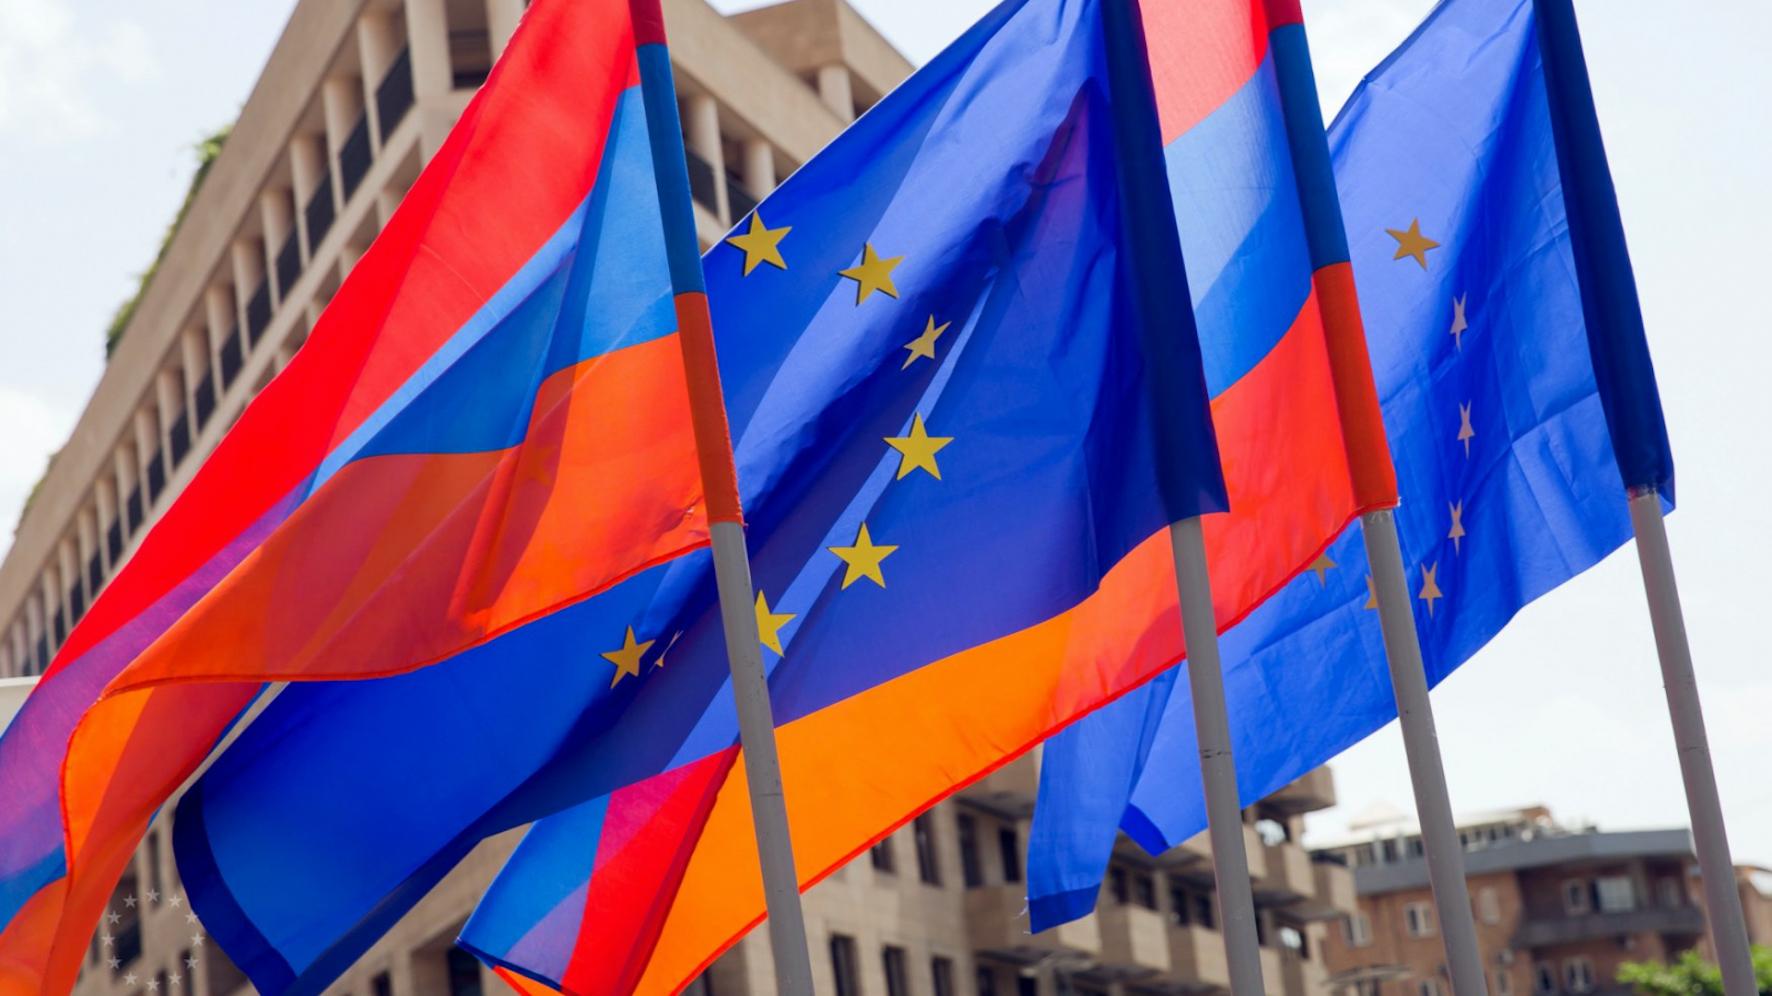 Armenia’s anti-corruption efforts “unsatisfactory,” says Council of Europe